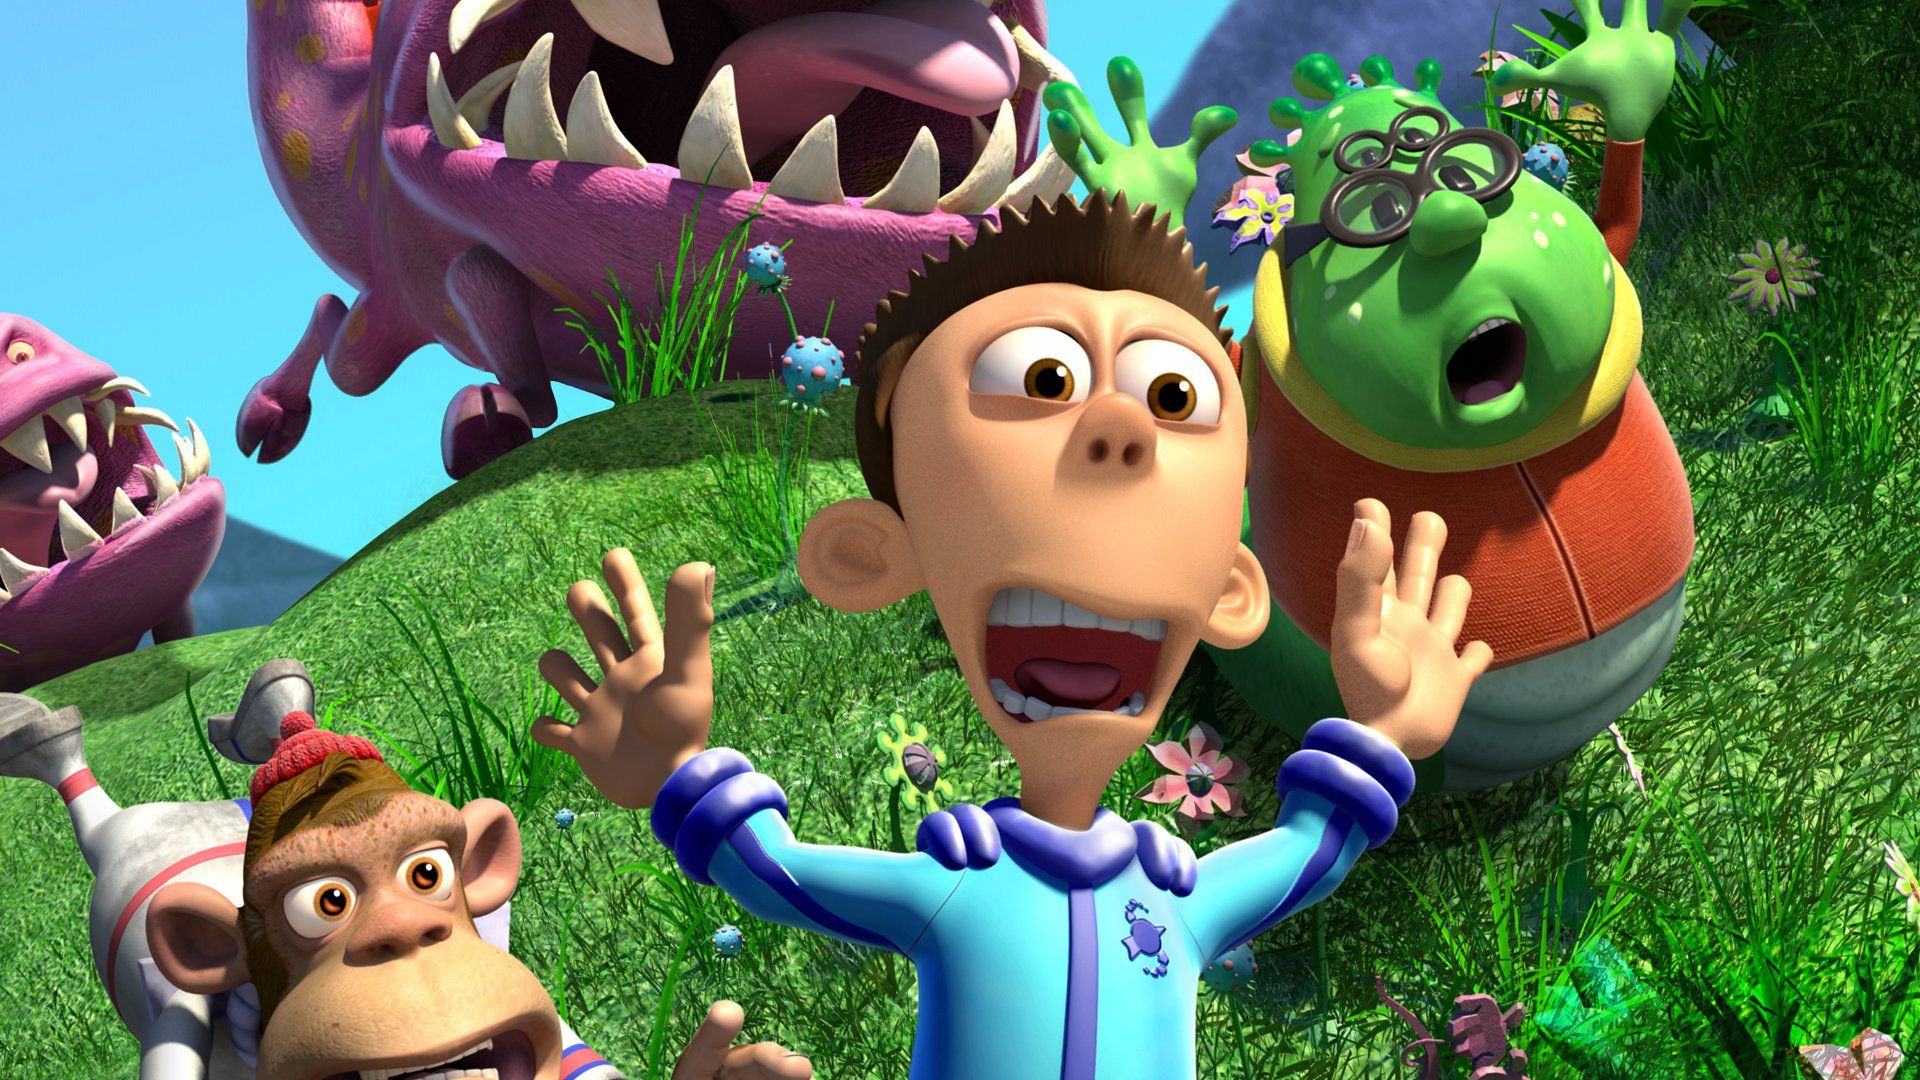 Planet Sheen background